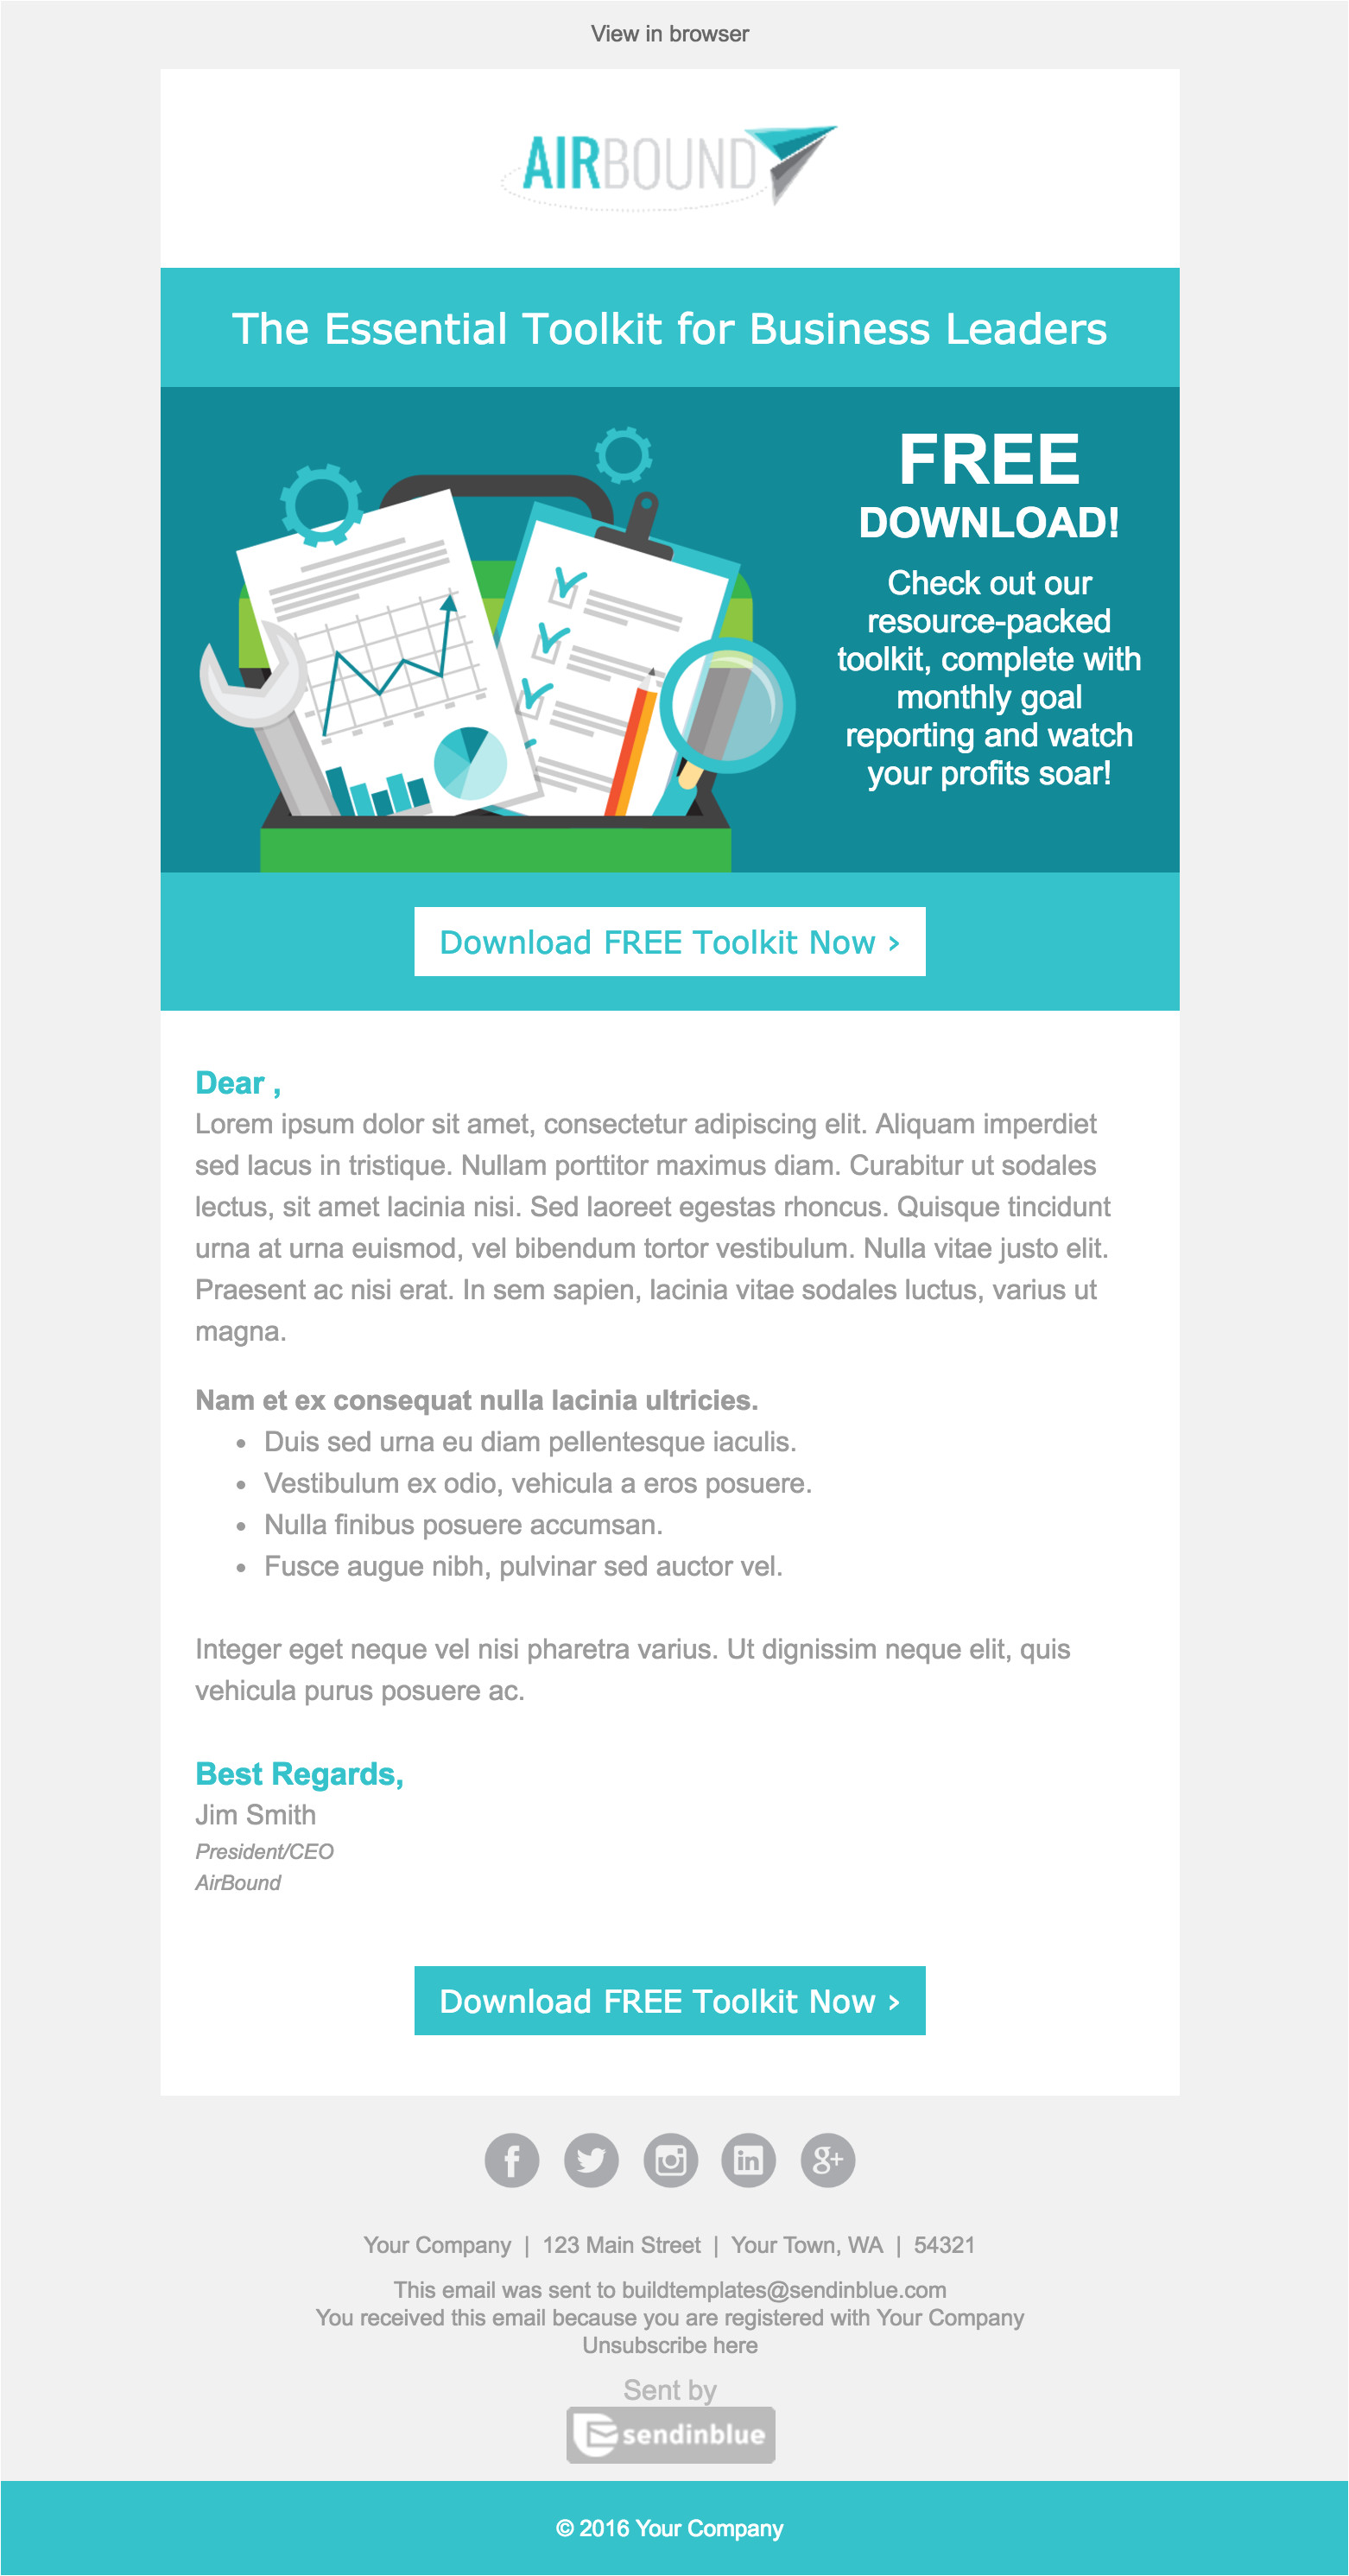 B2b Email Templates top 8 B2b Email Templates for Marketers In 2017